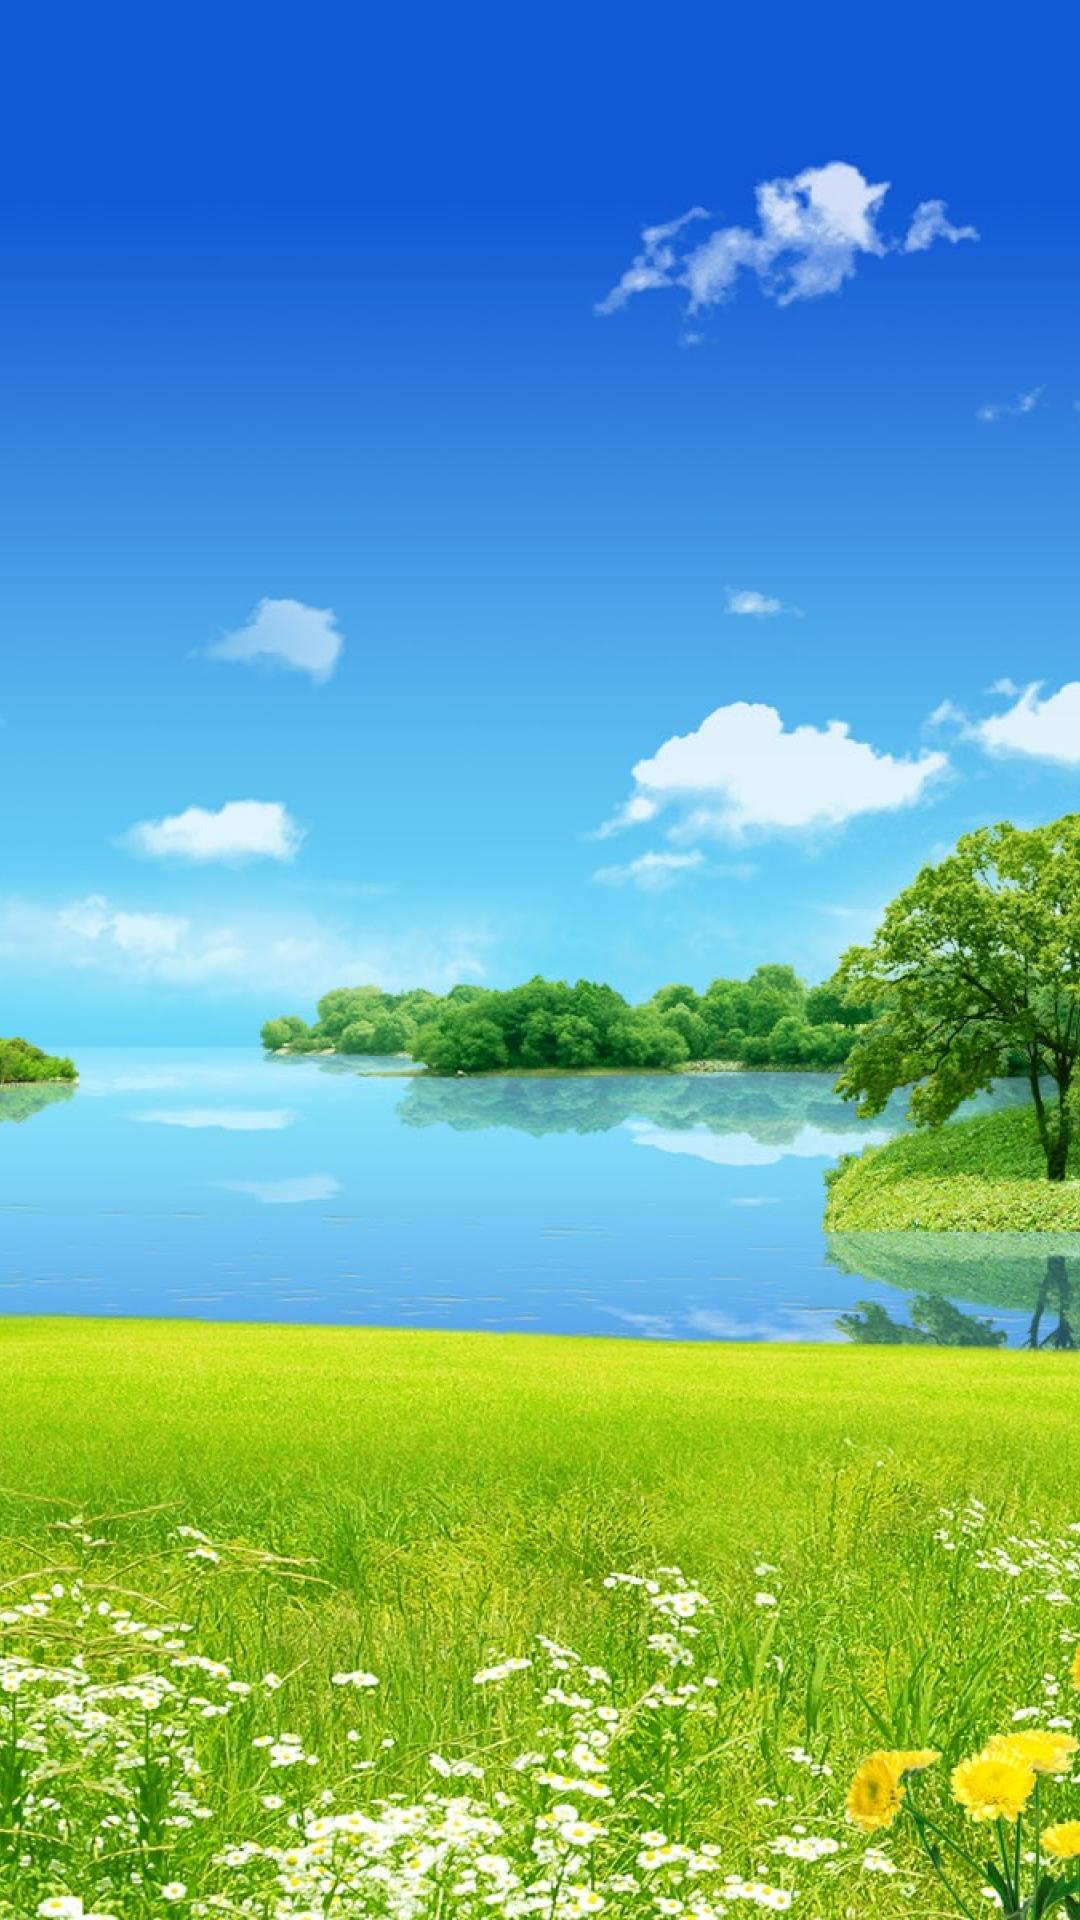 nature wallpaper hd for mobile free download,natural landscape,nature,sky,green,water resources